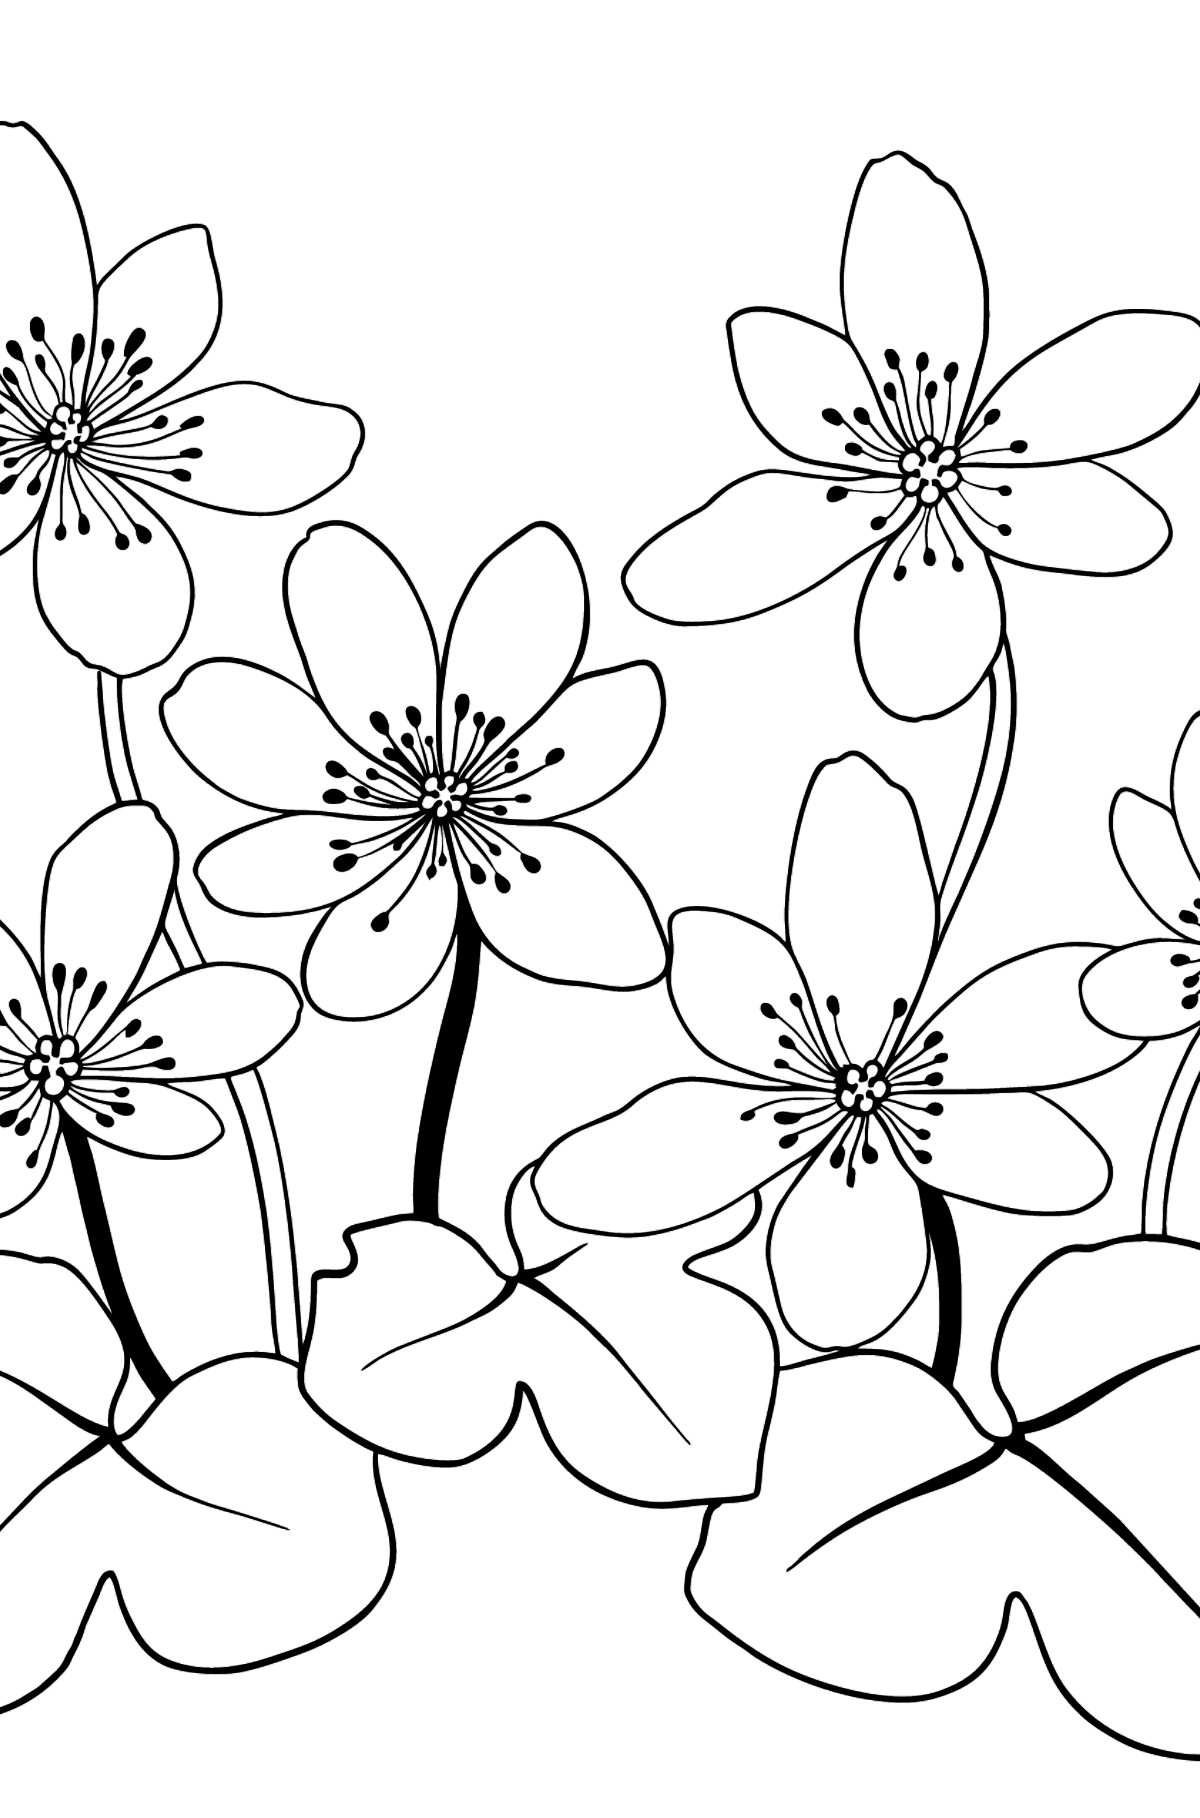 Flower Coloring Page - Hepatica - Coloring Pages for Kids